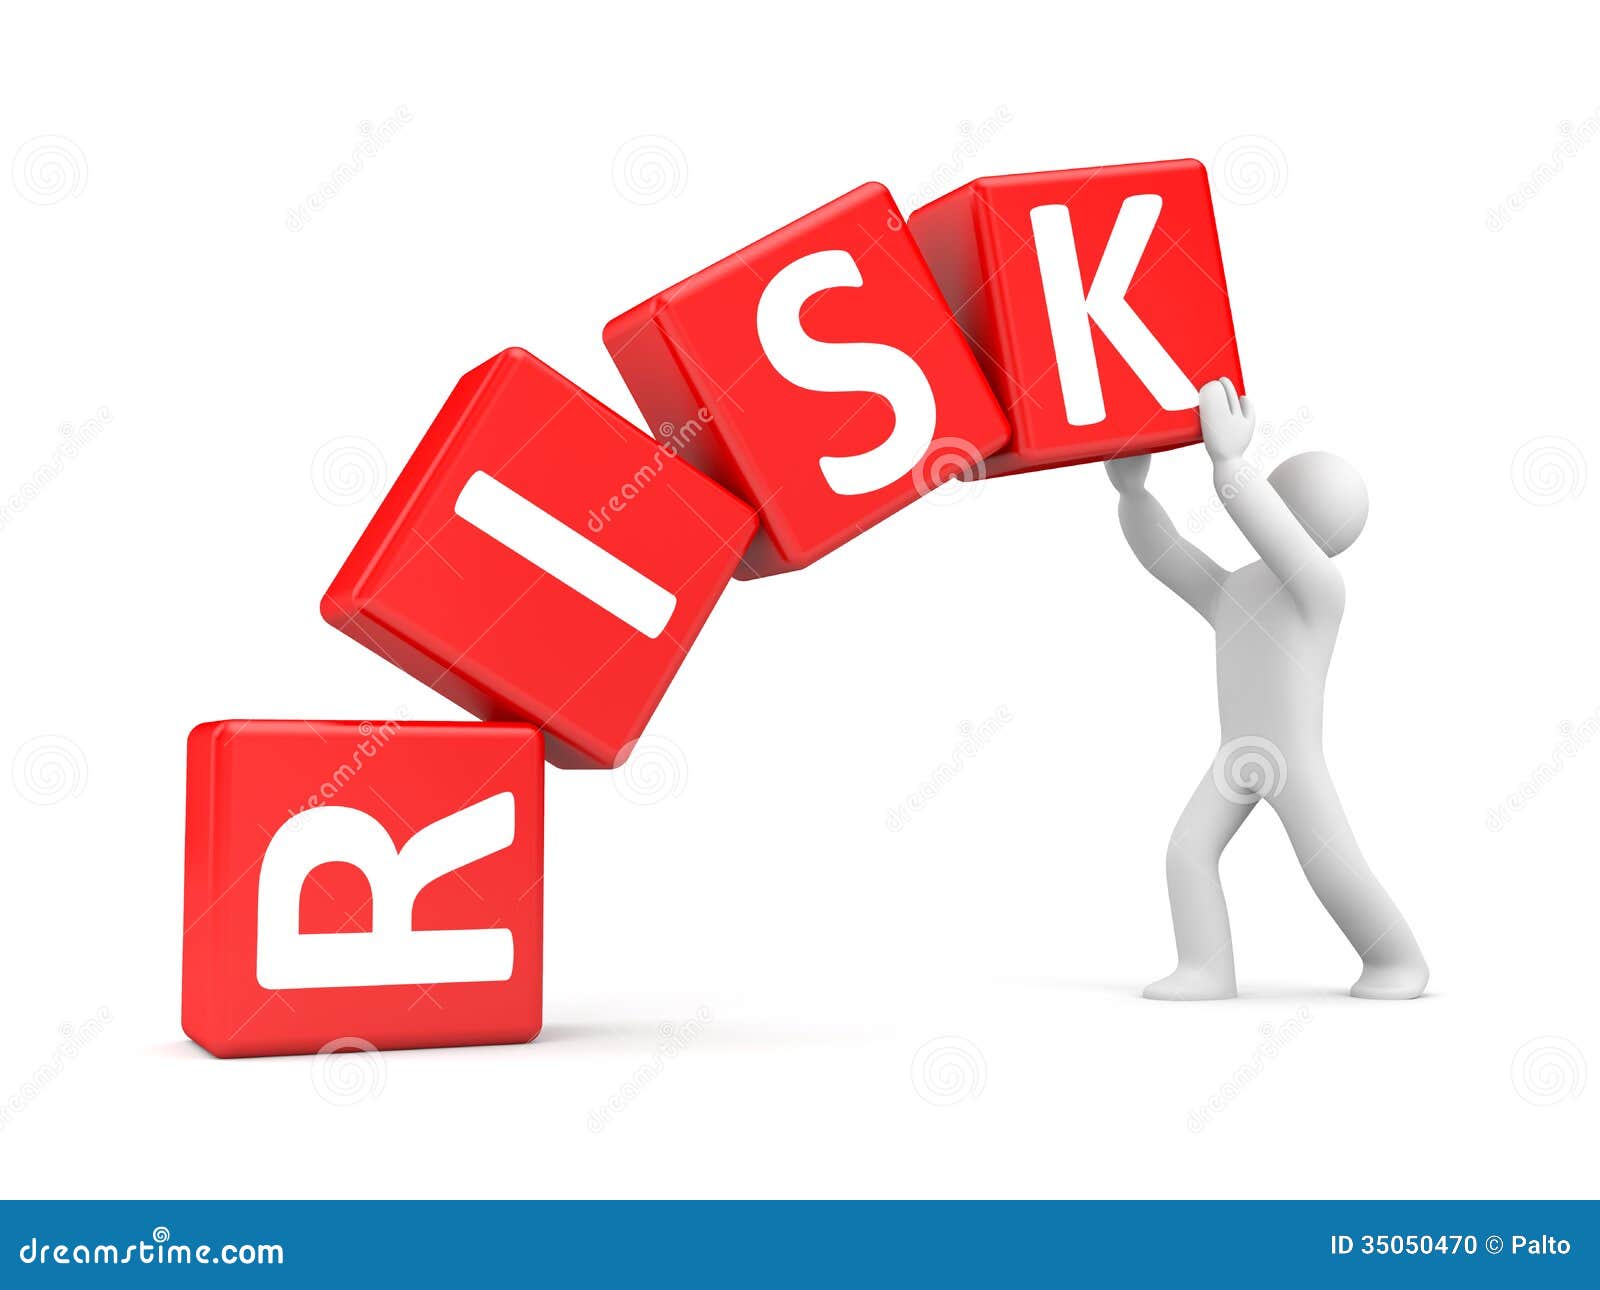 business risk clipart - photo #19